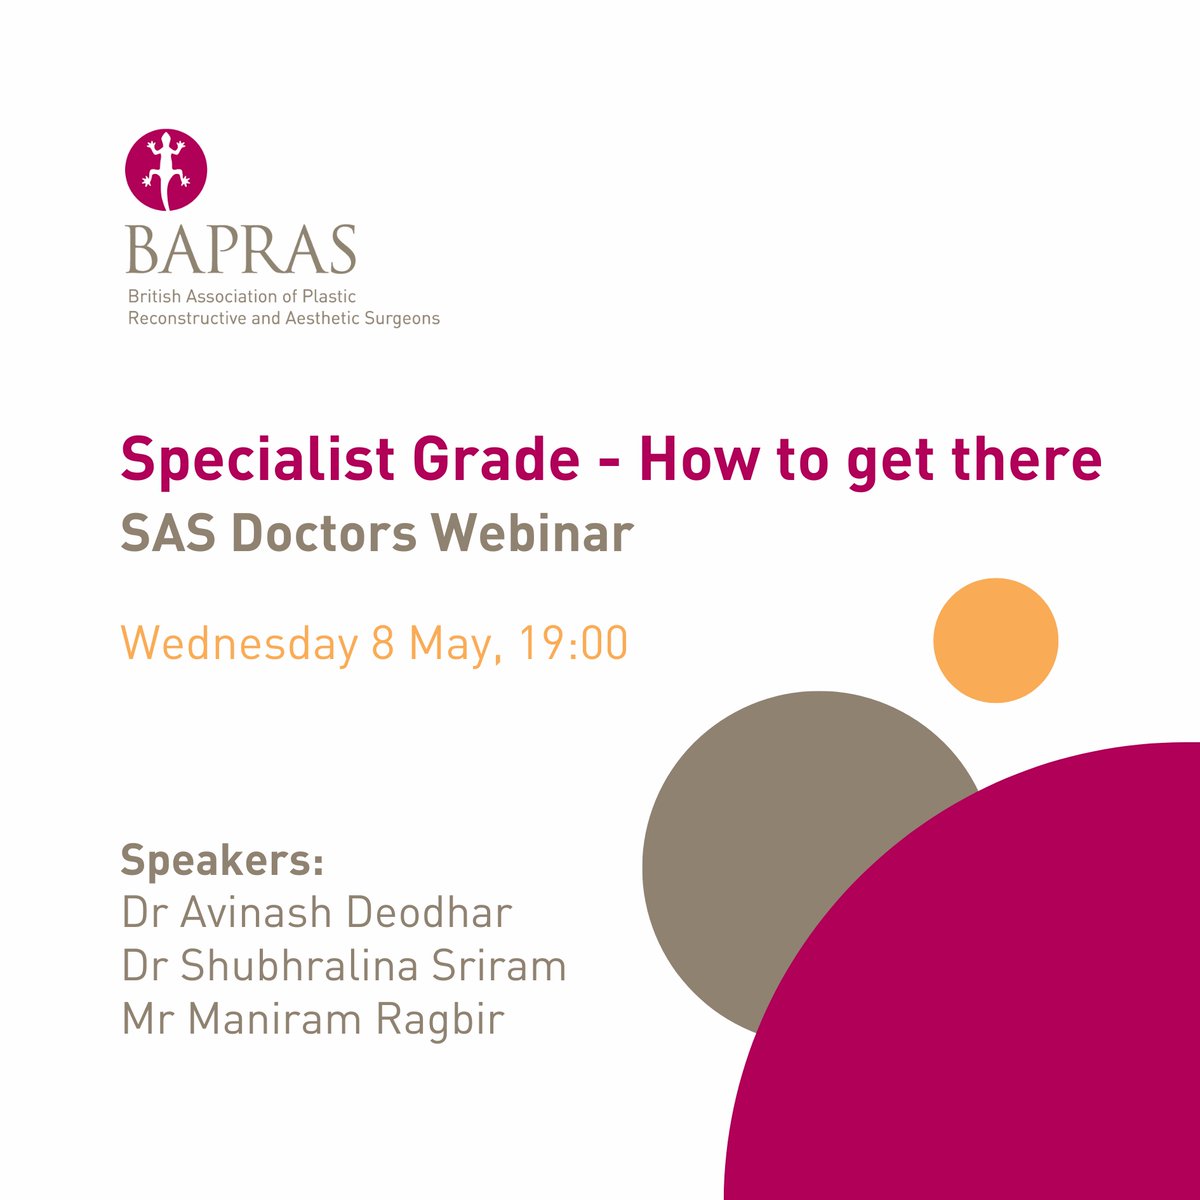 📢SAS doctors, join us on Wednesday, May 8th at 19:00 for a free webinar! Hear insights from BAPRAS president, Mani Ragbir, Avinash Deodhar and Shubhralina Sriram. Register below and please encourage SAS doctors in your unit to participate.⁠ ➡️us02web.zoom.us/webinar/regist…